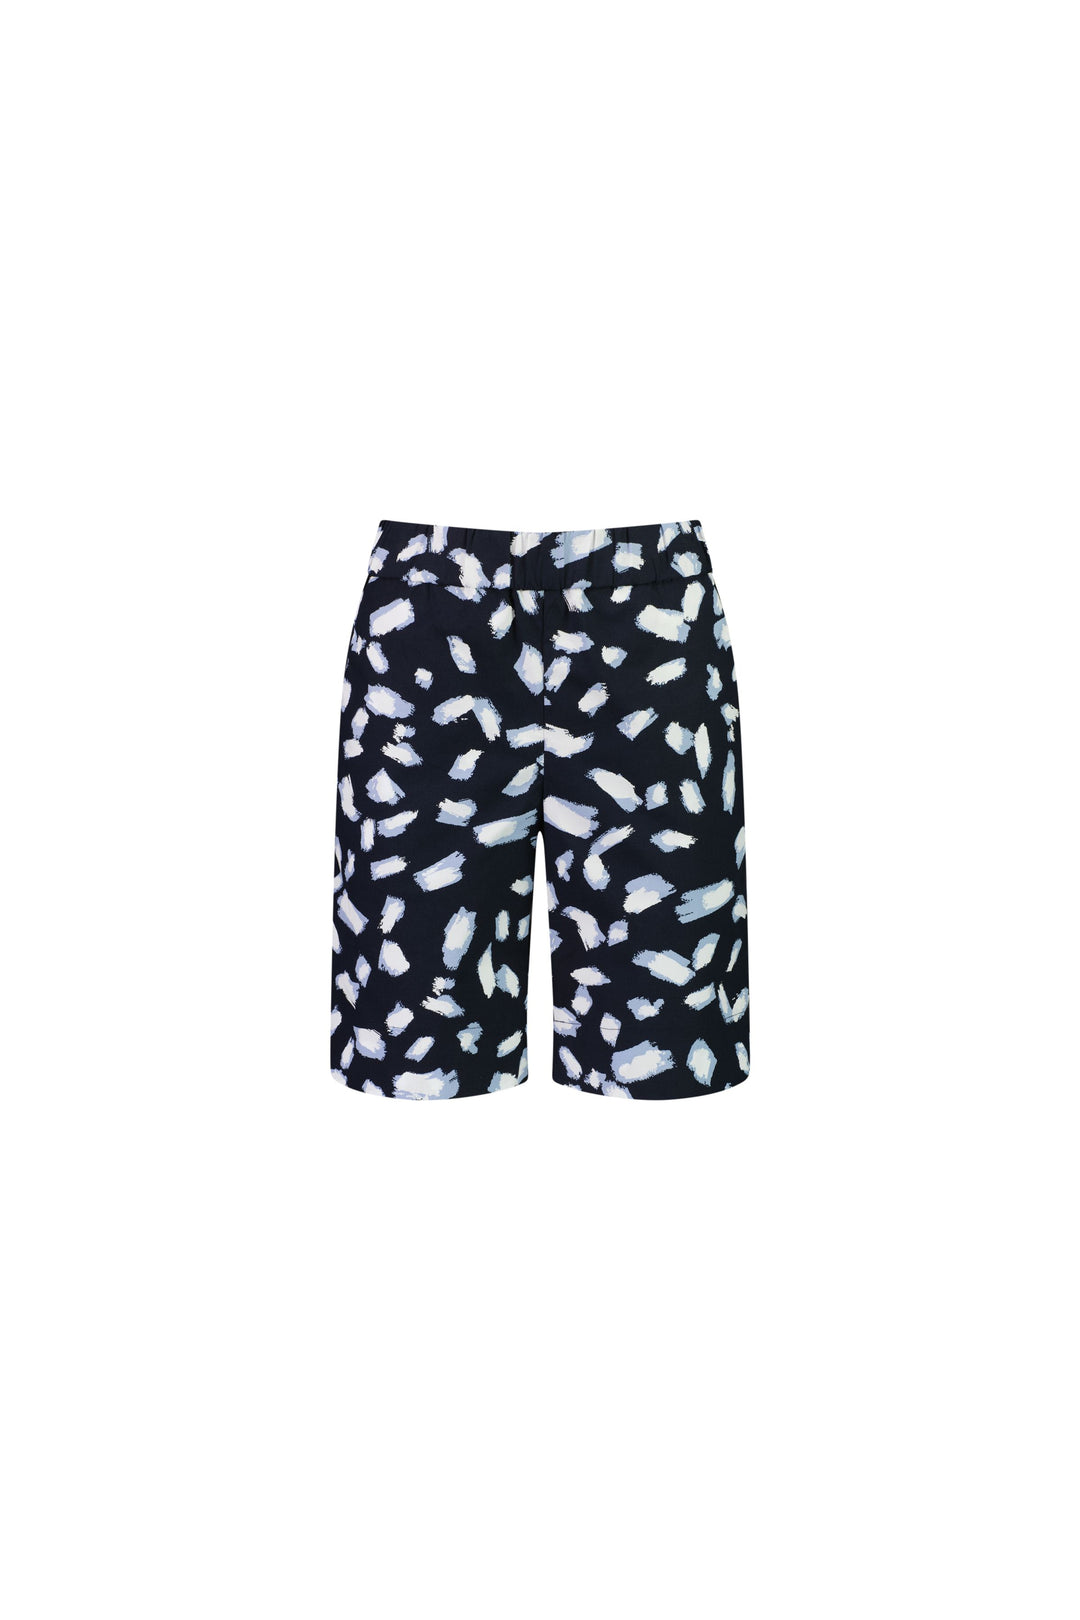 50% OFF | PULL ON RELAXED SHORT - RAPT ONLINE